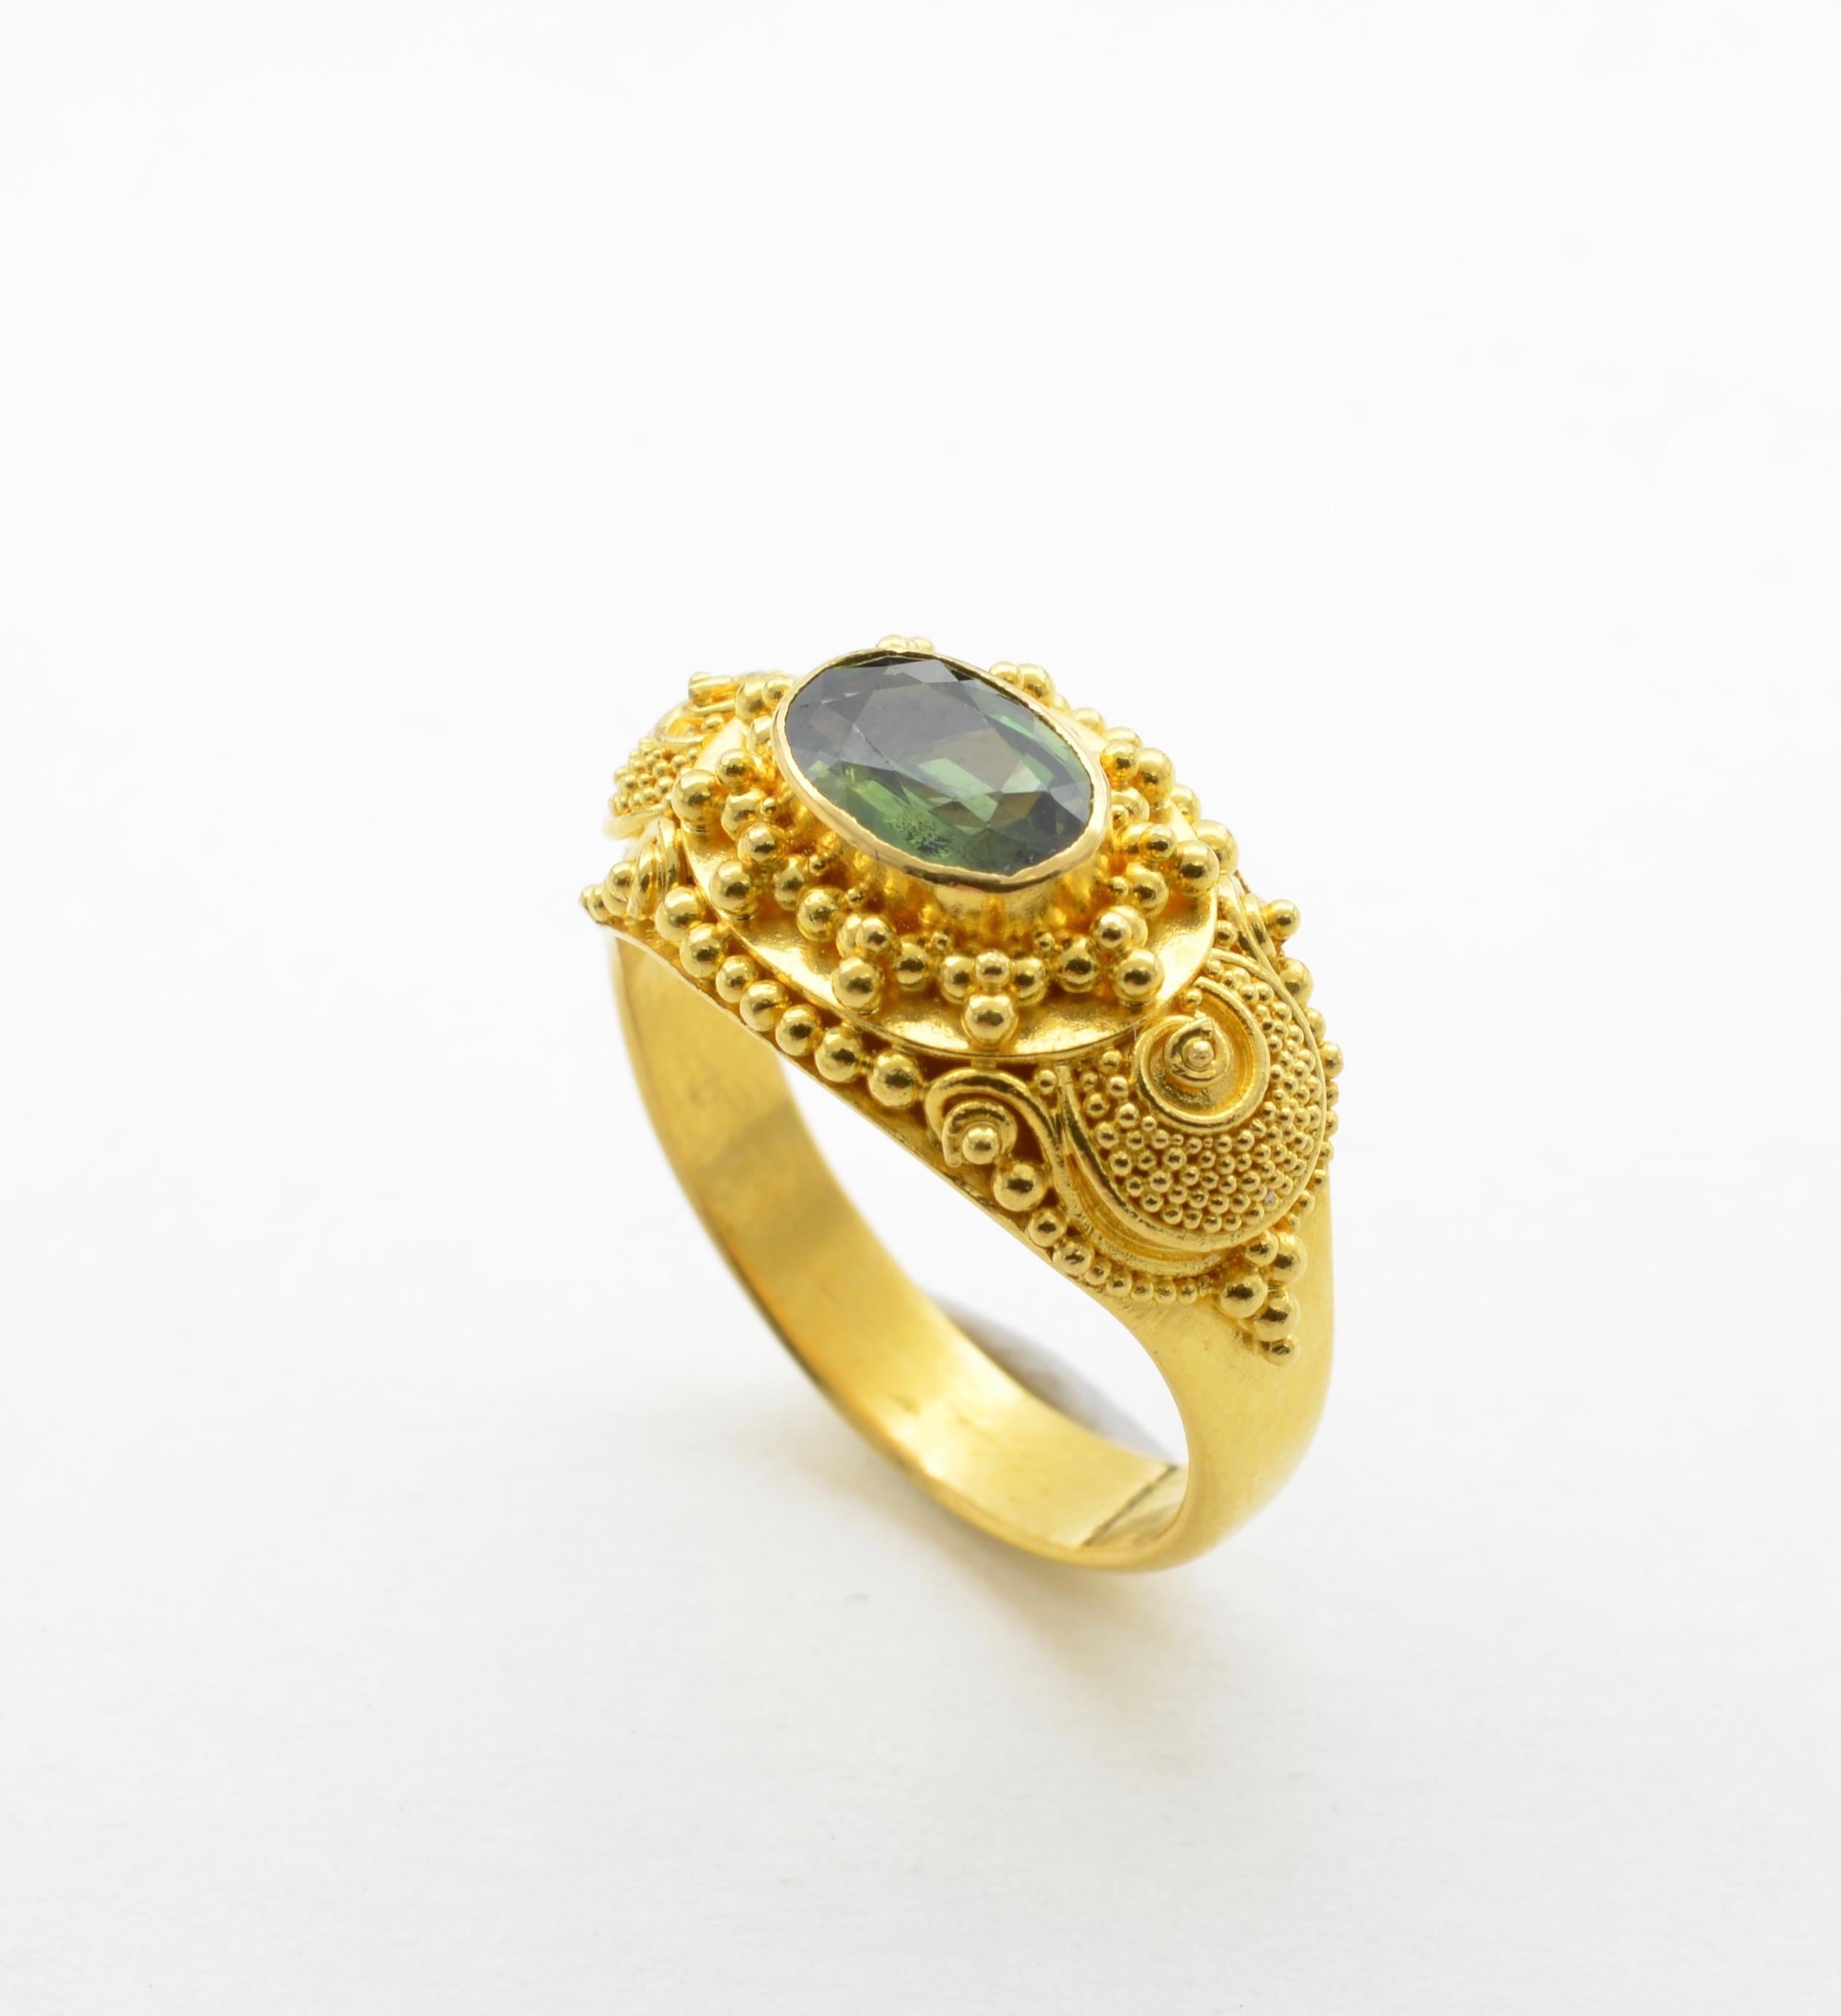 Anglo-Indian Green ‘Approximate 1.0 Carat’ Tourmaline Ring in 22 Karat Gold with Granulation For Sale